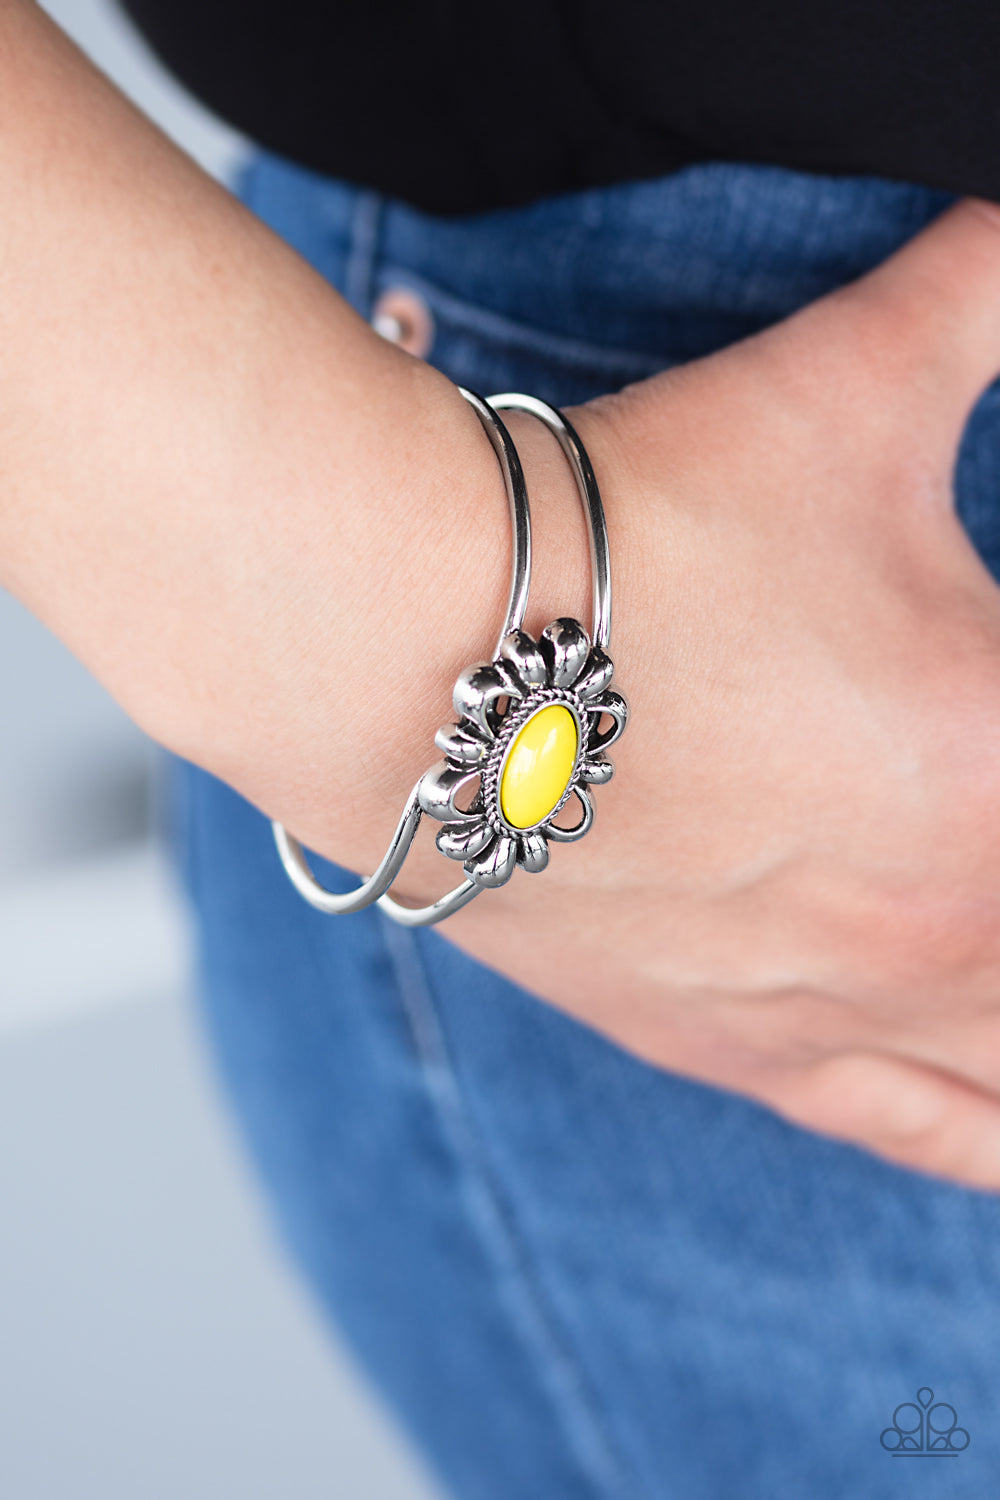 Paparazzi Serene Succulent - Yellow - Mosaic Bead - Shiny Silver Floral Frame - Hinged Bracelet - $5 Jewelry with Ashley Swint